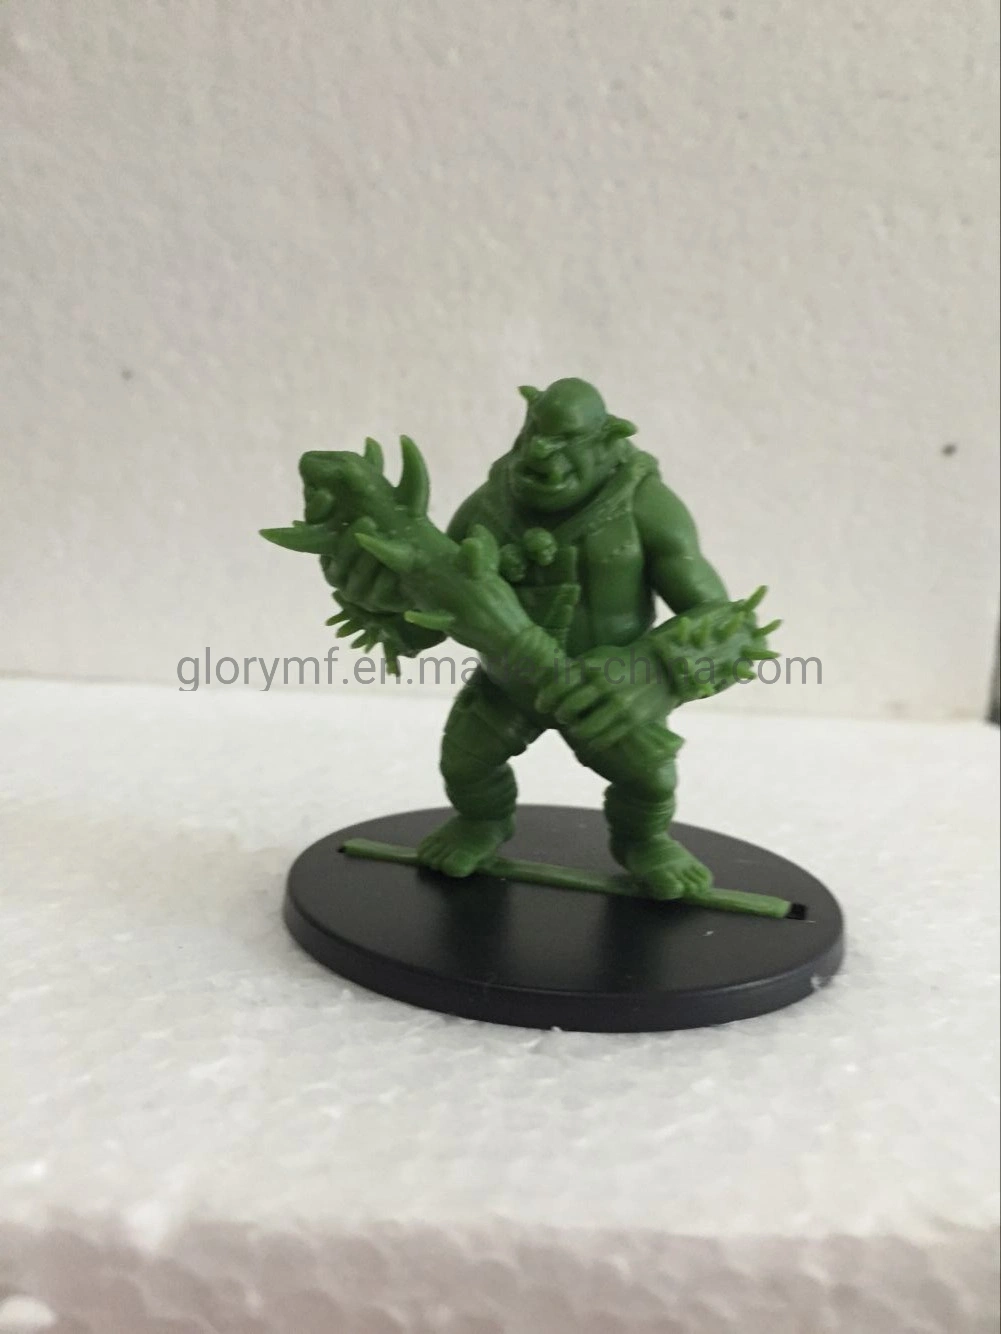 3D Printed Action Figure Prototype Sample